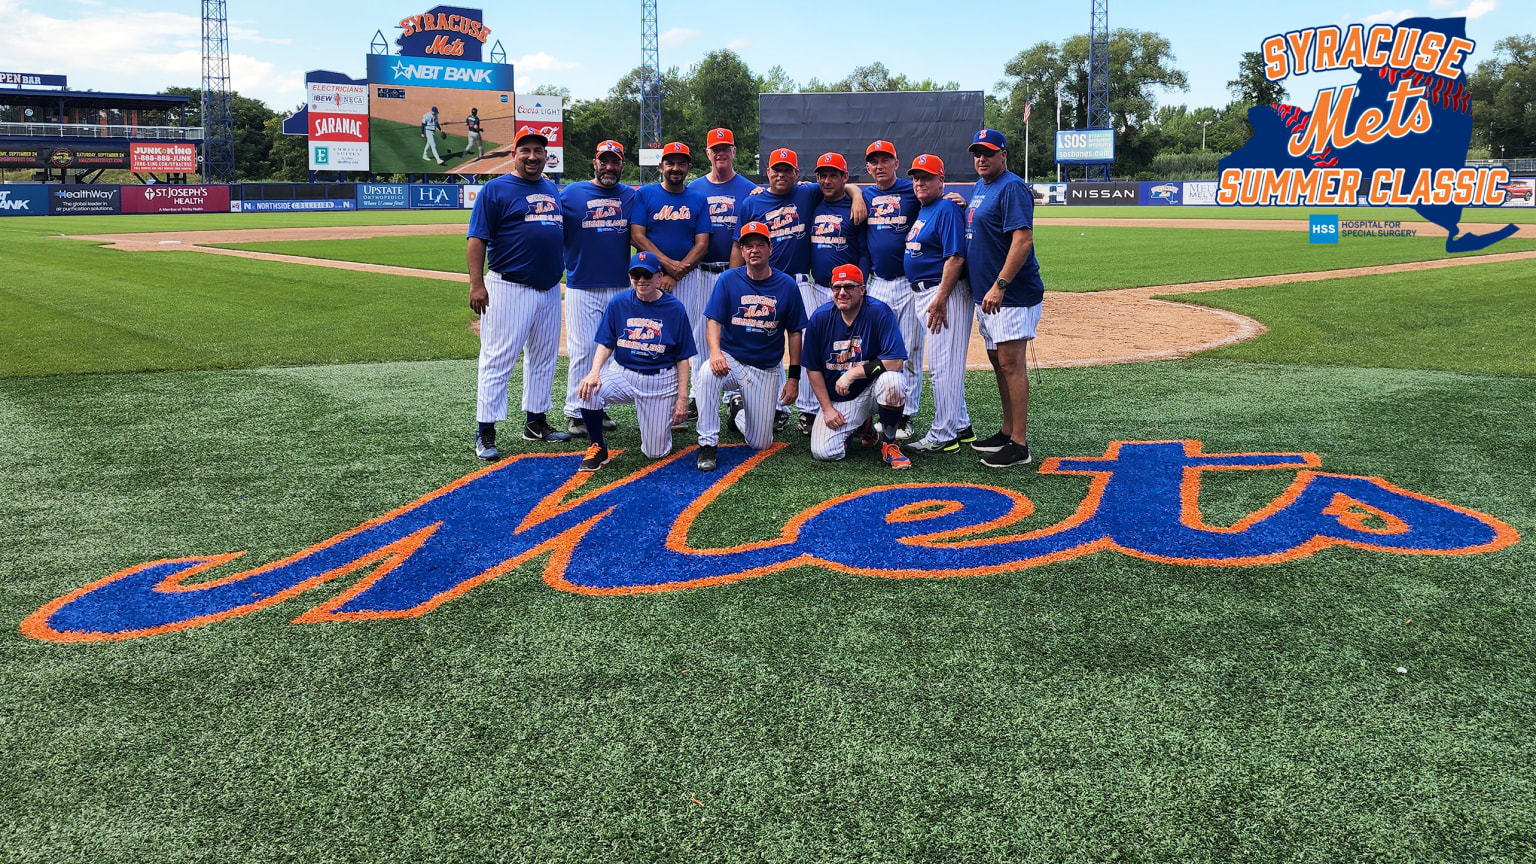 The New York Mets Spring Training Experience